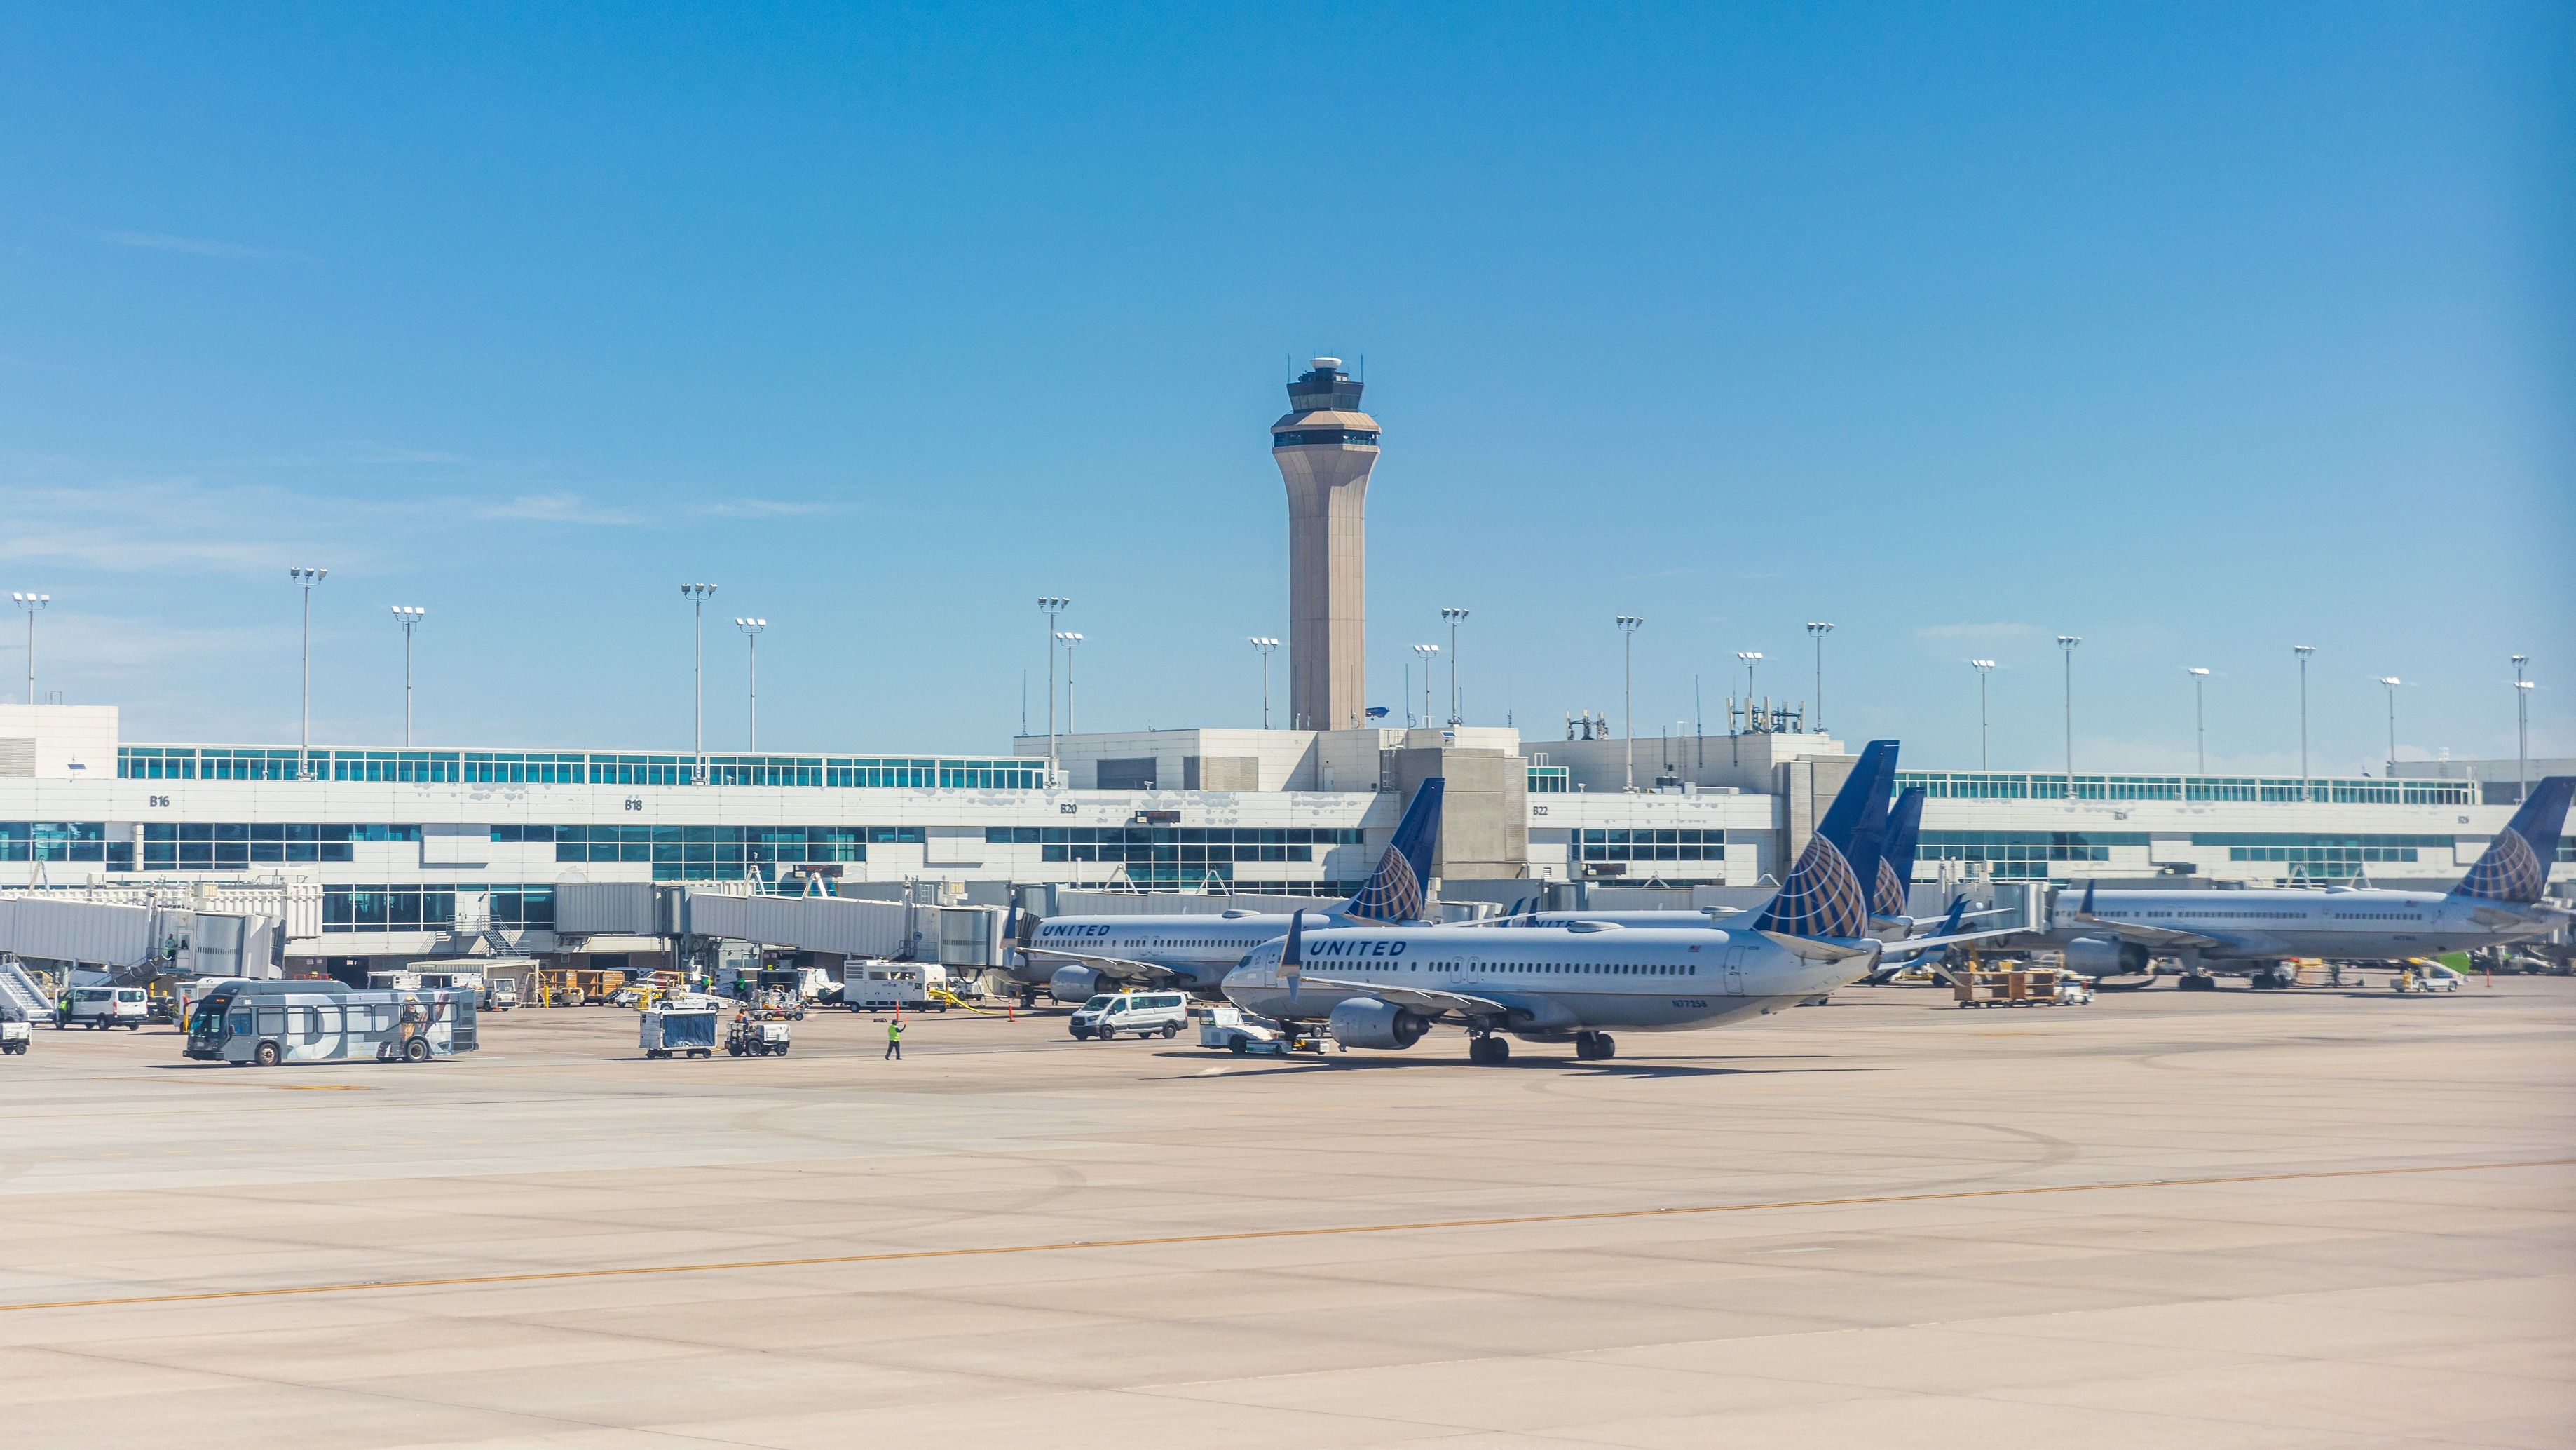 United Airlines Boeing 737s at Denver International Airport